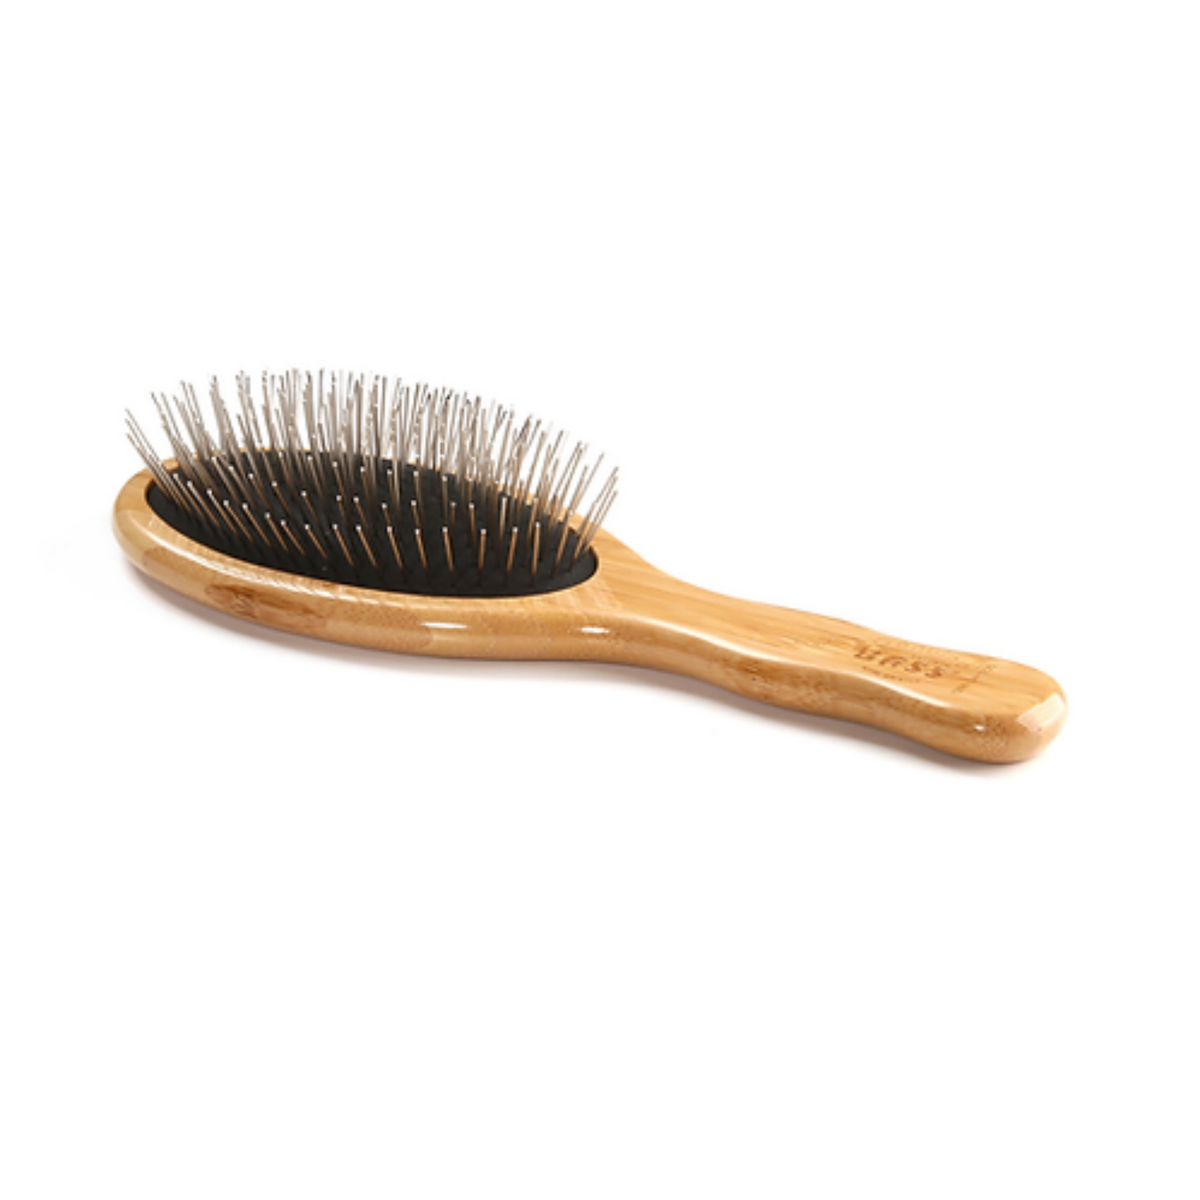 Primary Image of Large Oval Cusion Wire Bristle Brush